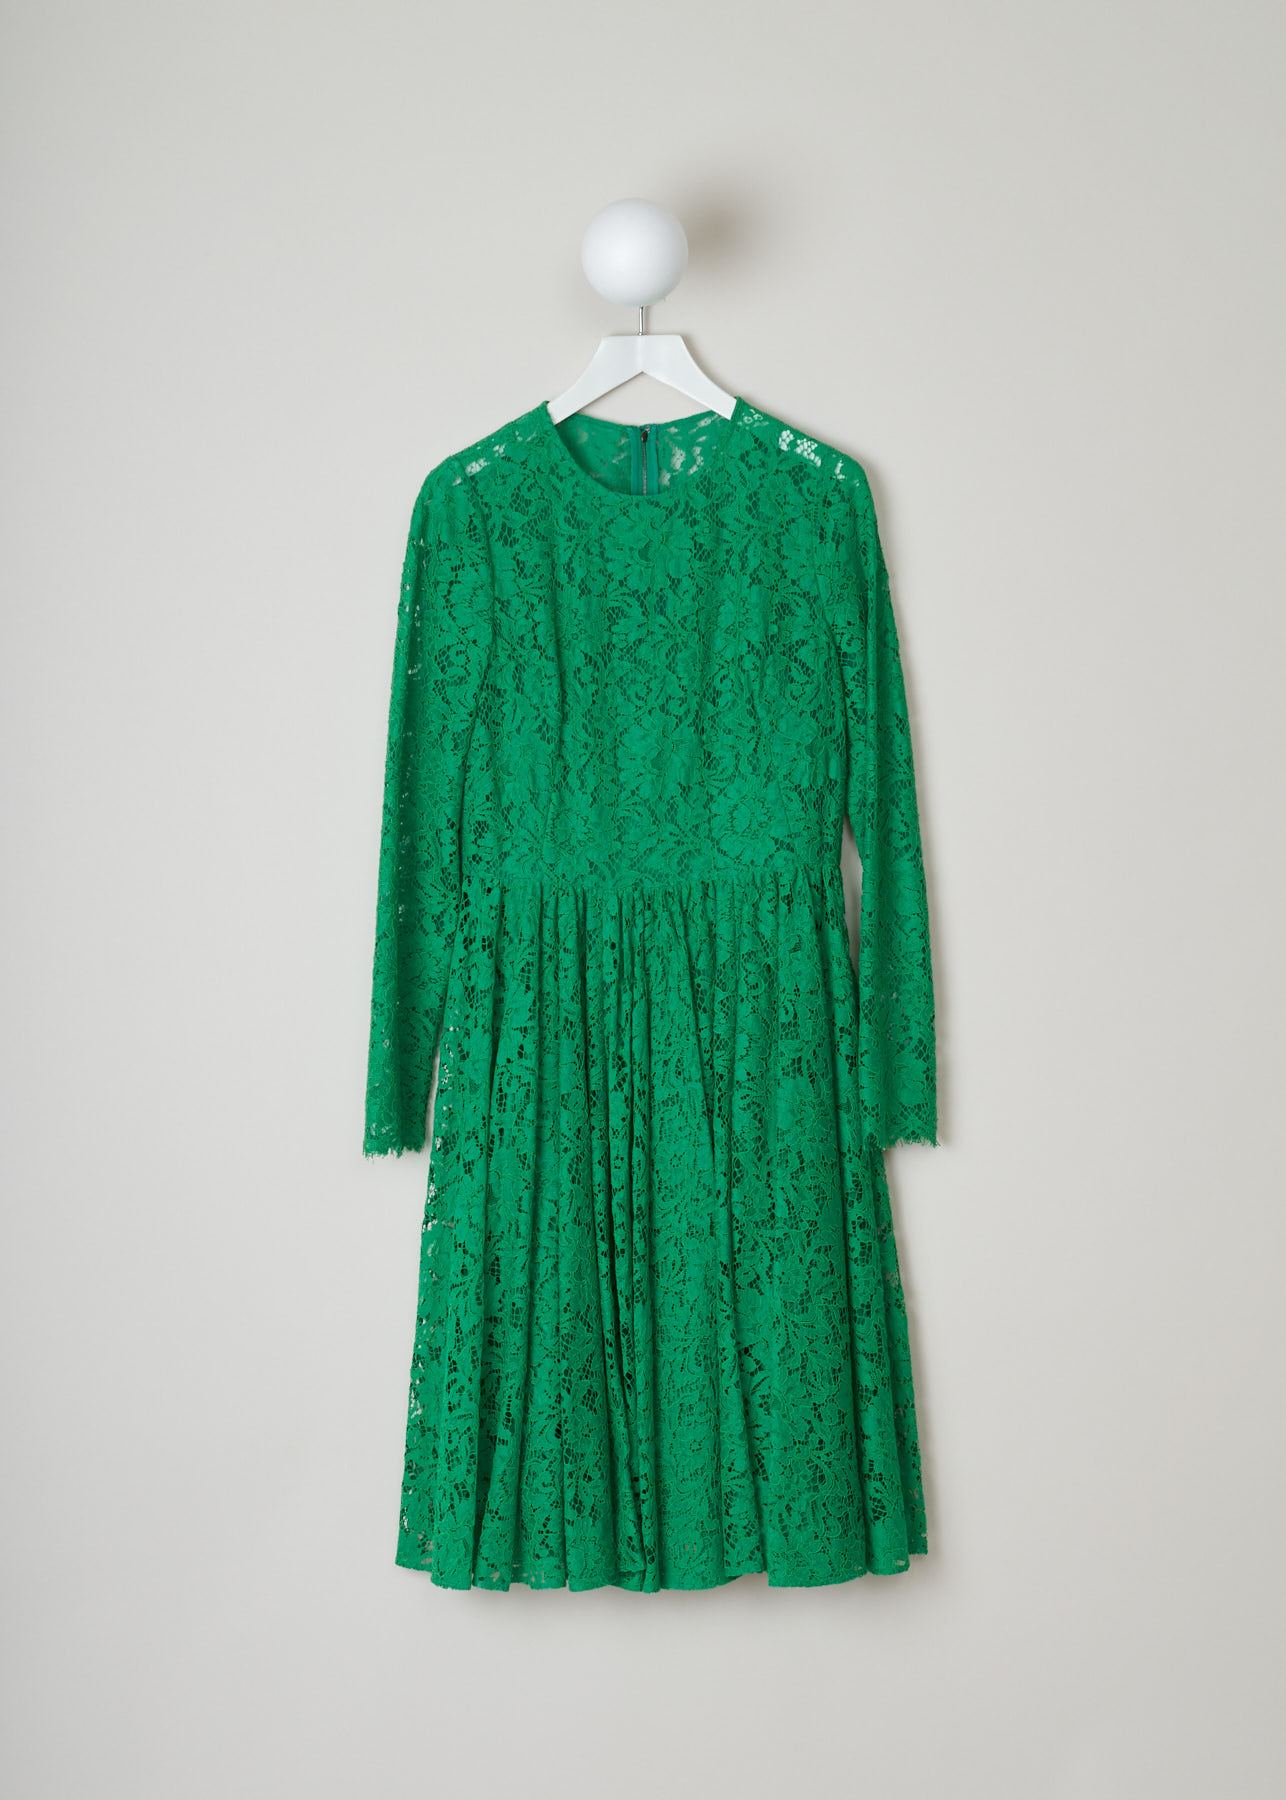 Dolce & Gabbana, Floral laced long sleeve flaired dress,  F6VB6T_FLM9V_V0402, front, An intricately laced dress, with an beautifull floral patern stitched on a green meshing. Long frilled sleeves. Closes with a zip fastening along the back.